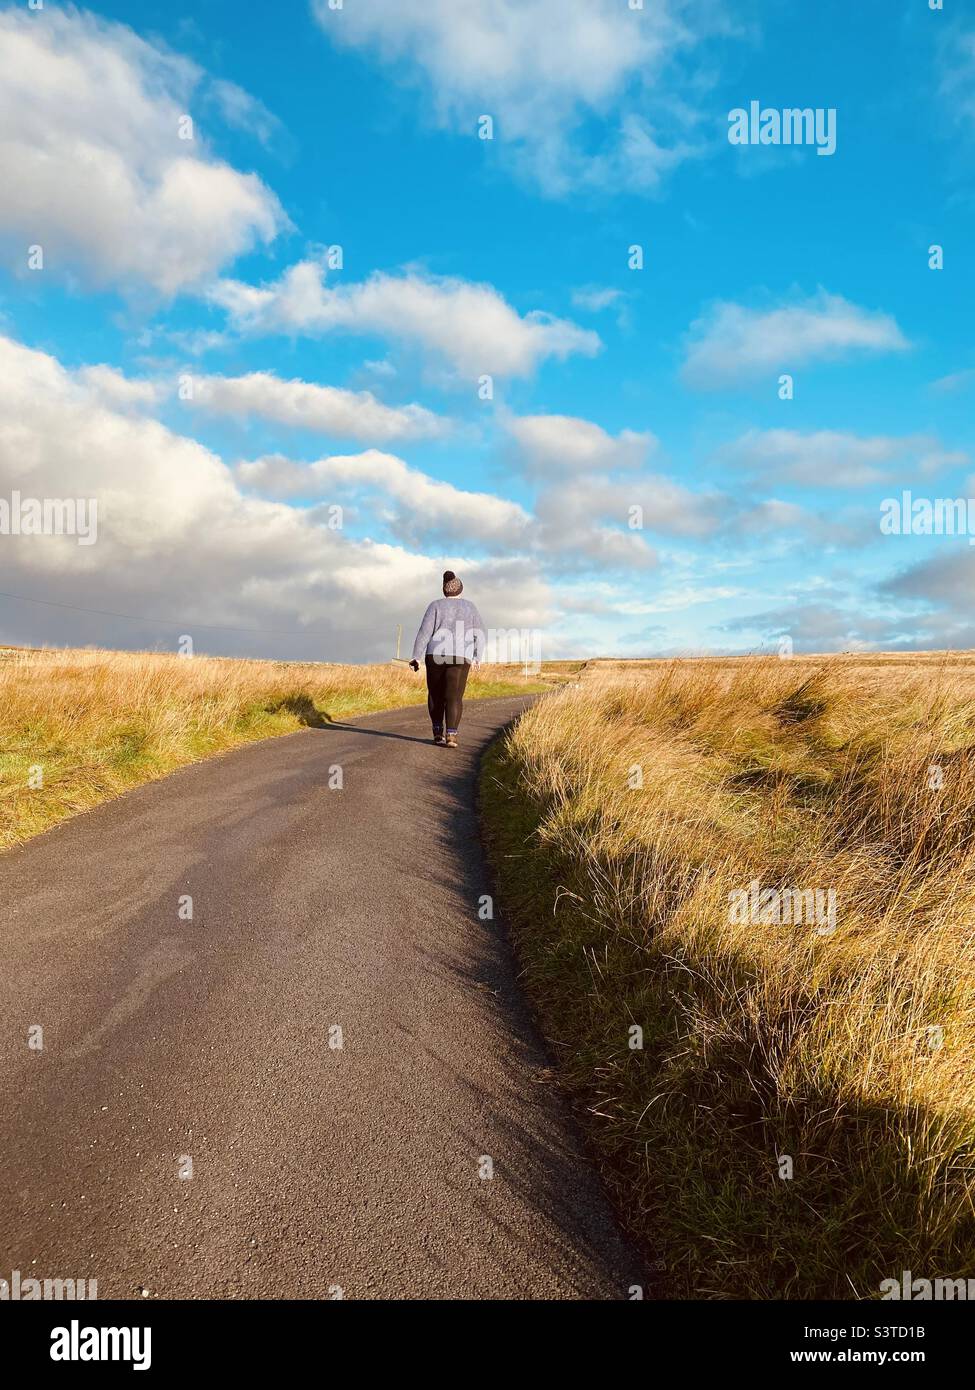 One person walking in the countryside Stock Photo